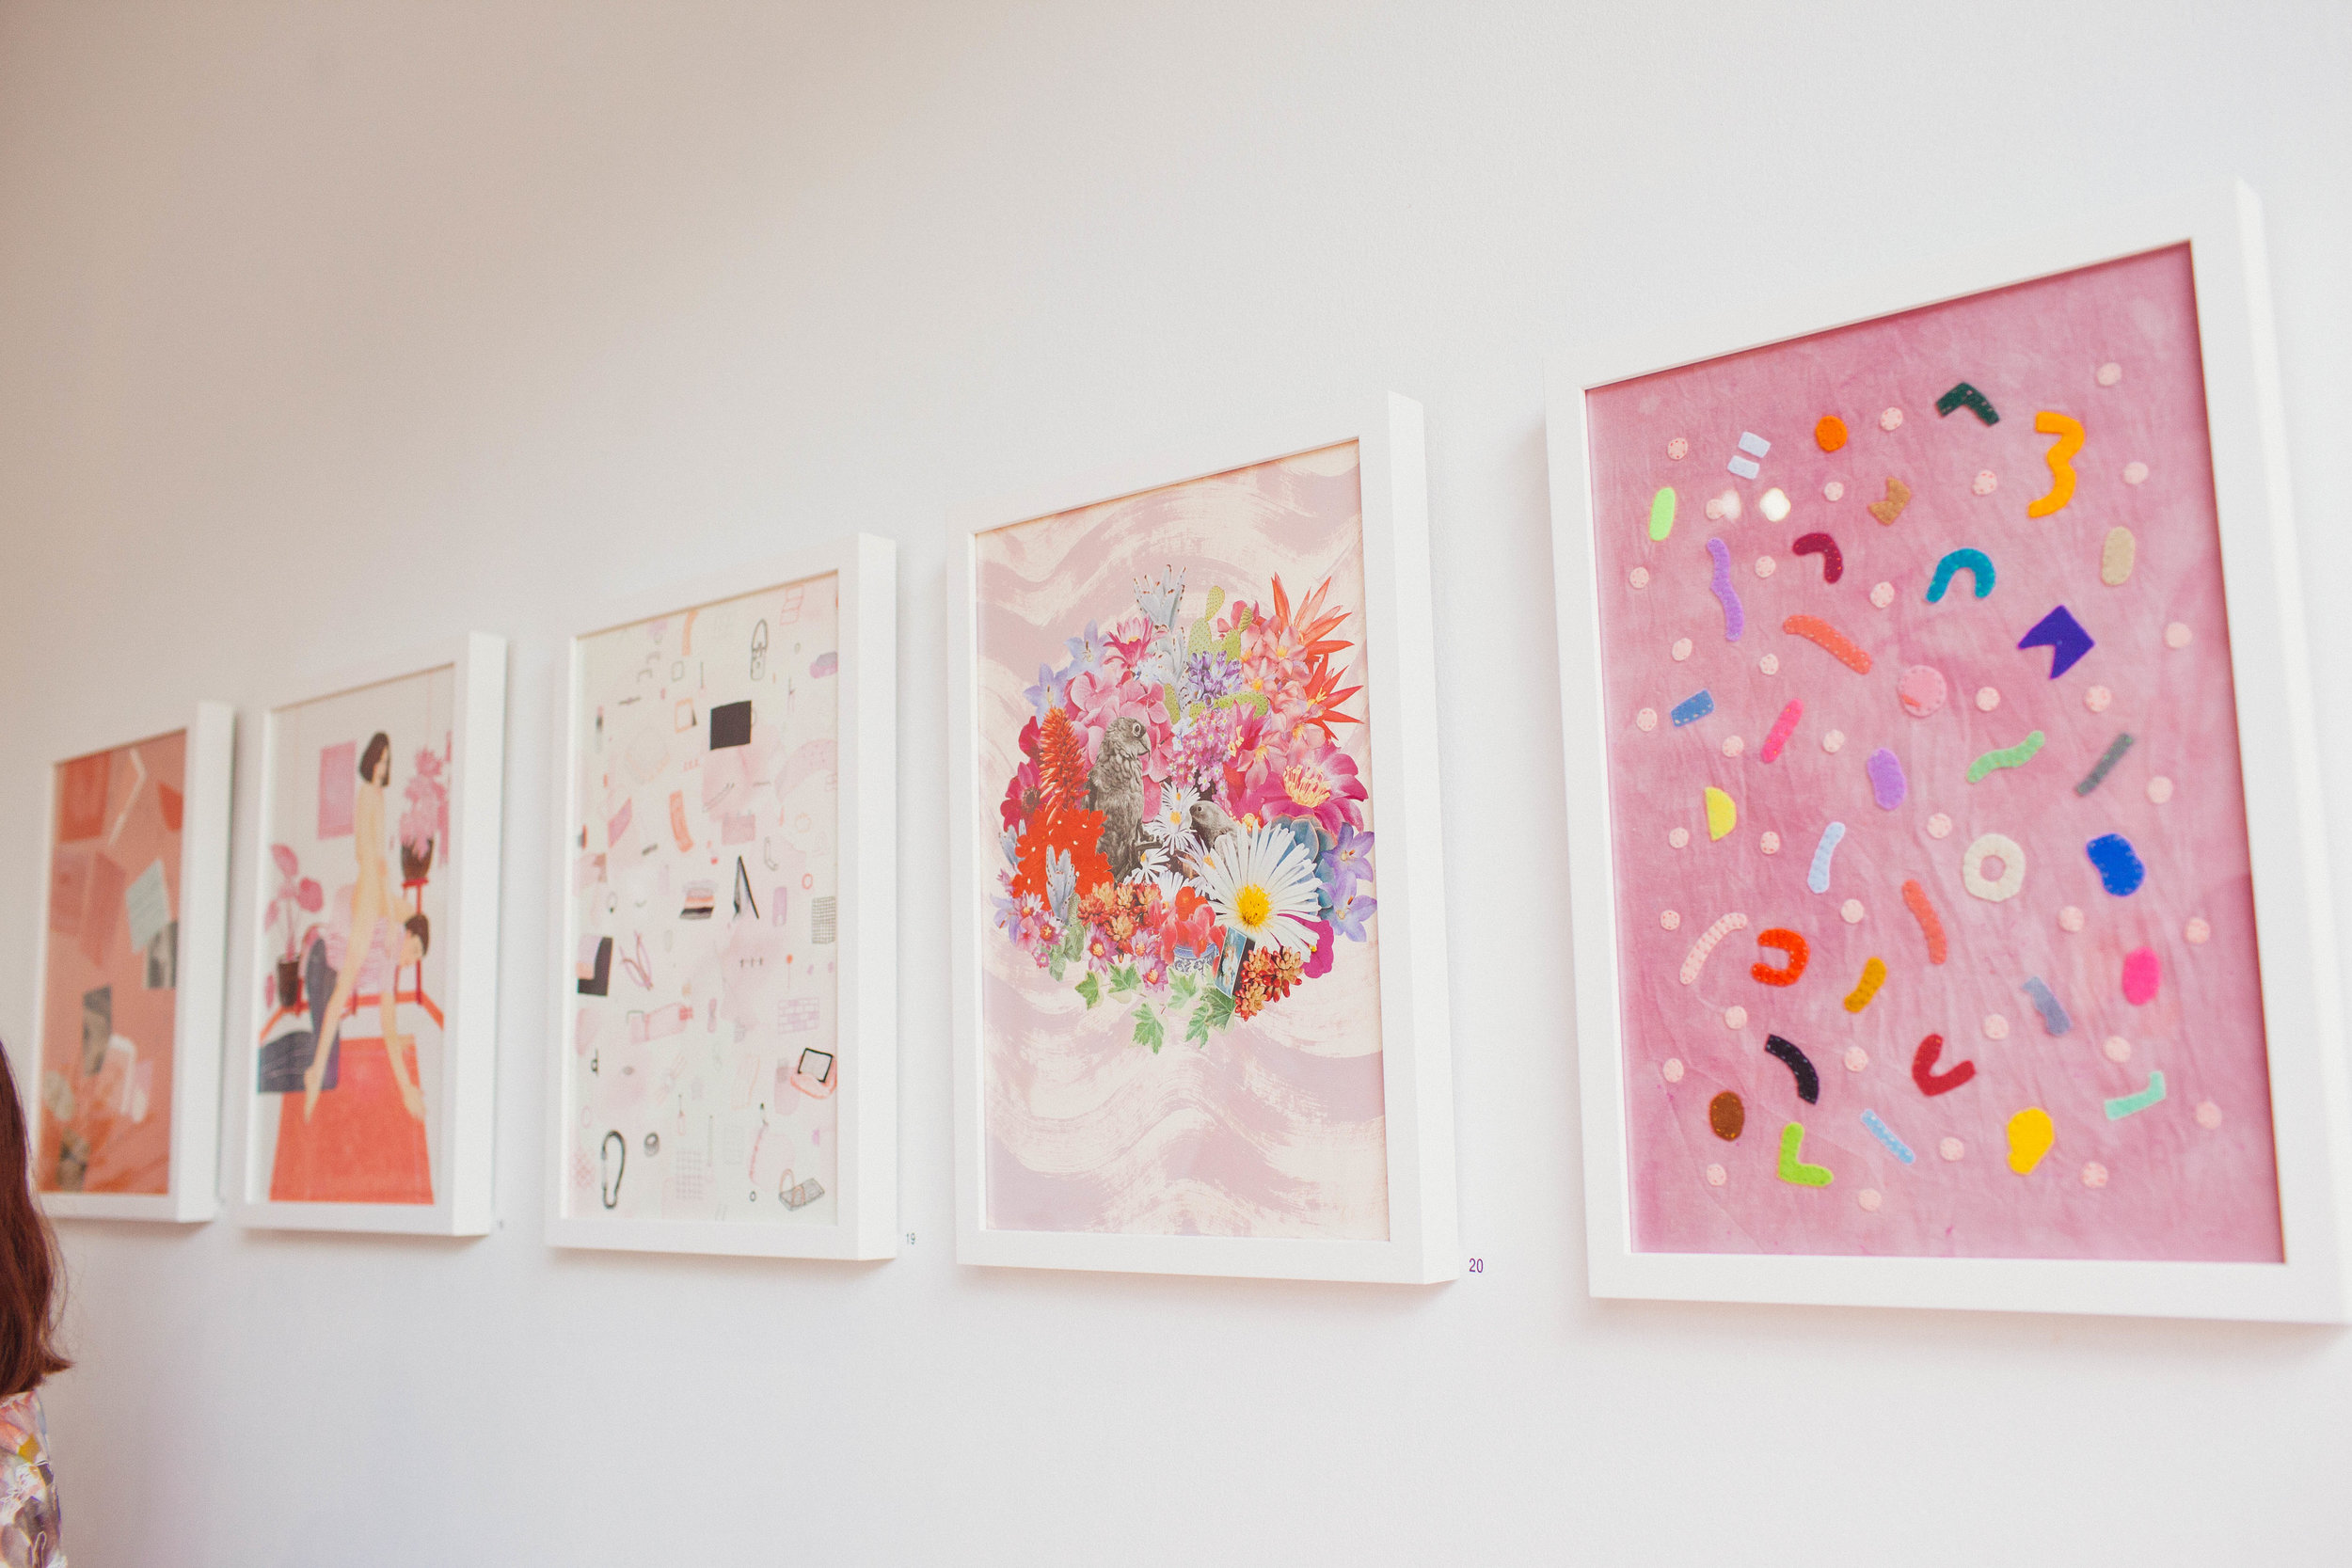  Installation view,  Think Pink,  2016, ENOUGH Space, Melbourne. Photo: Zoe Harriet. 